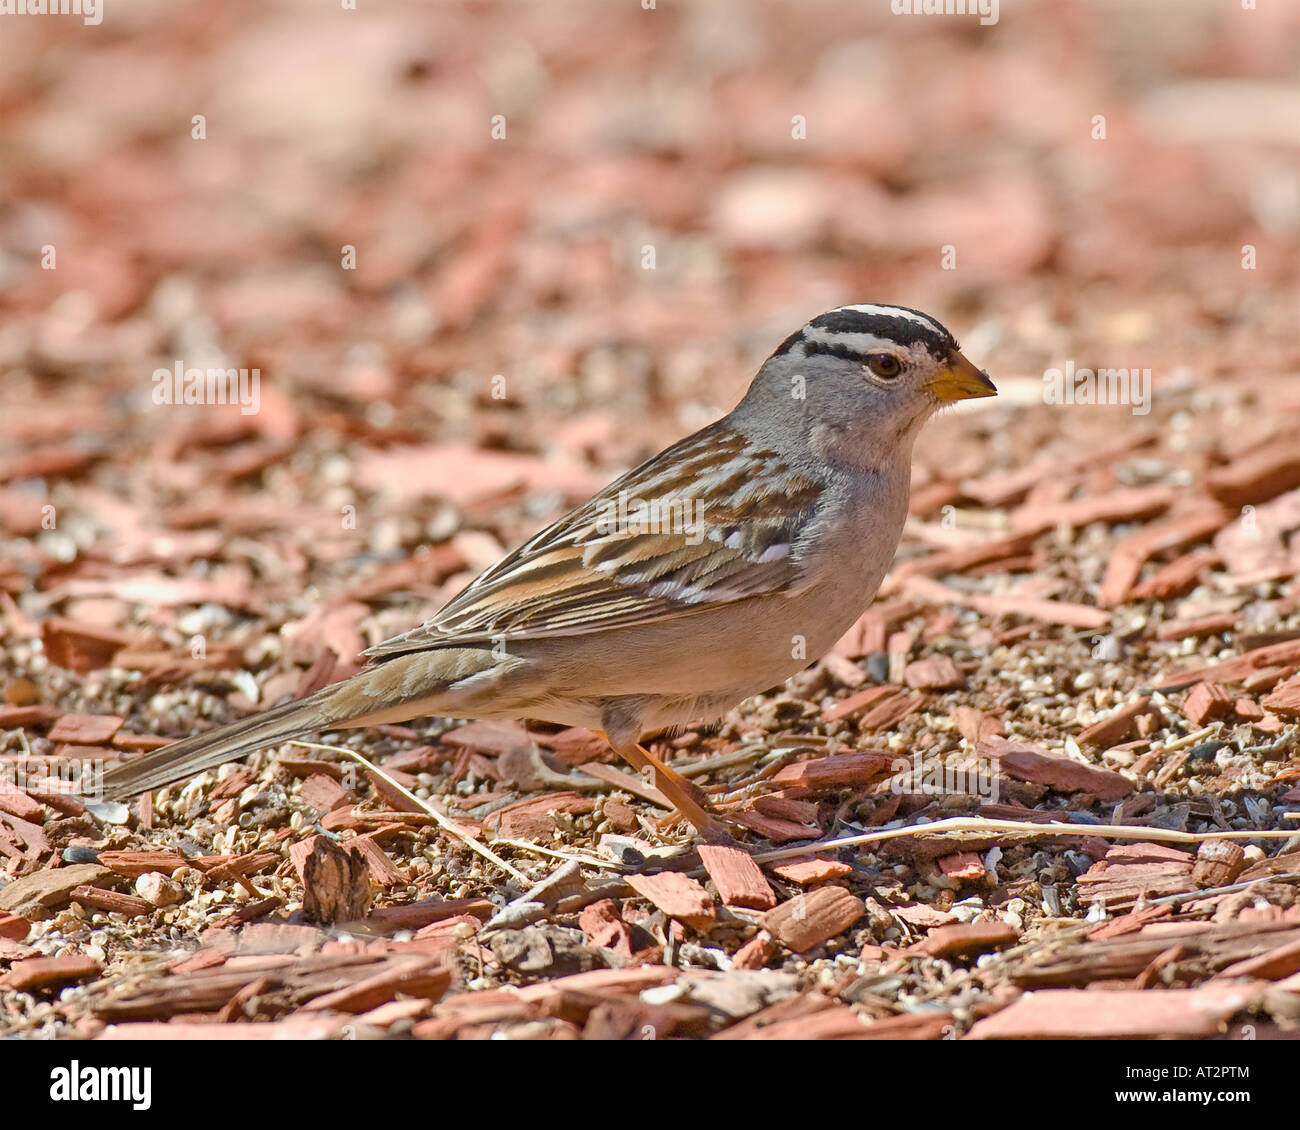 White-Crowded Sparrow in search of food.  Stock Photography by cahyman. Stock Photo